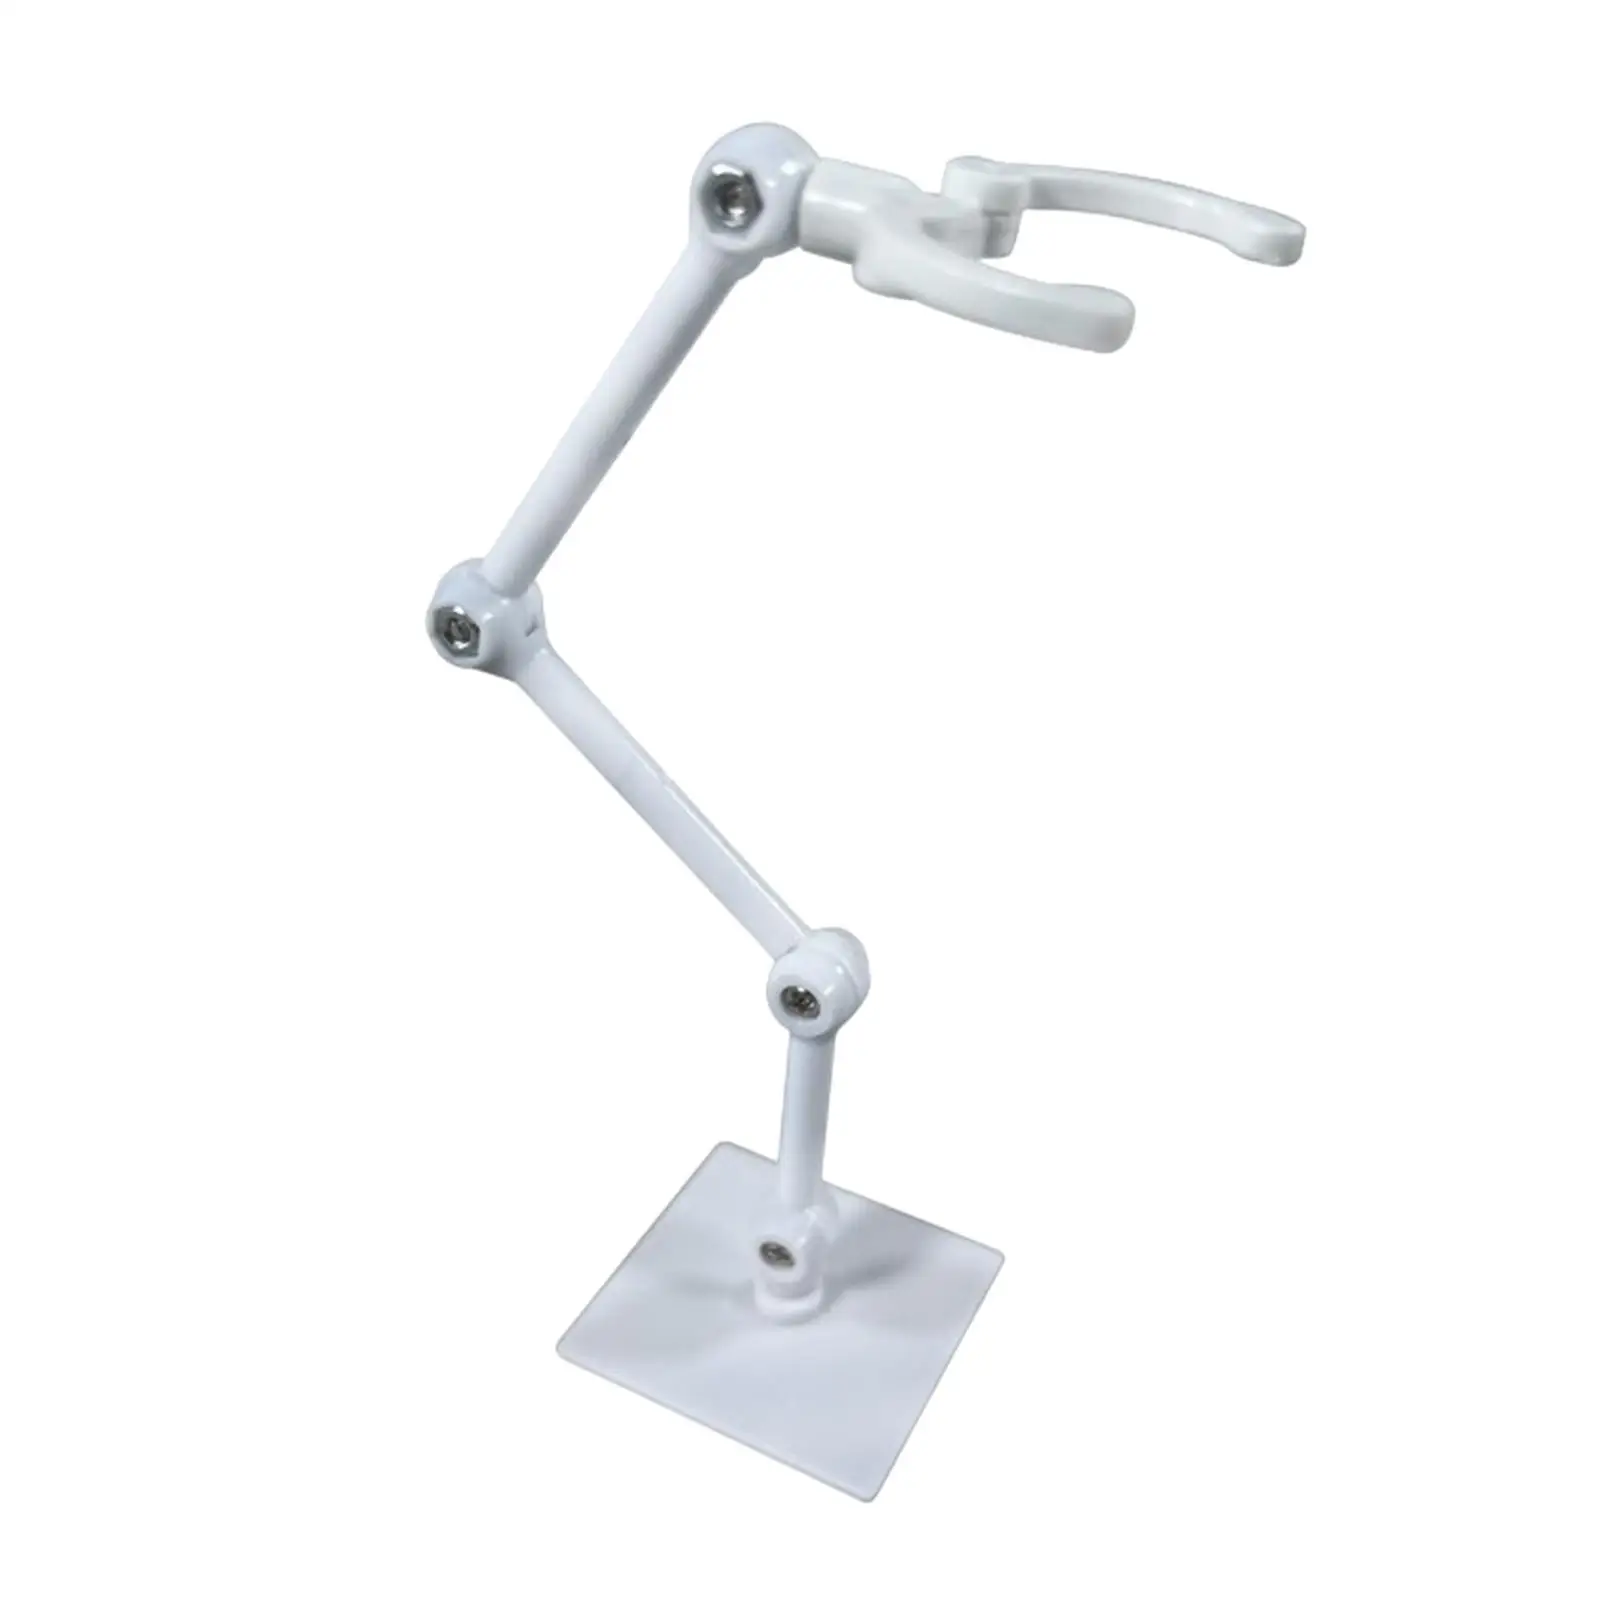  Base Adjustable Support Sturdy Flexible Rack for 6`` inch Doll